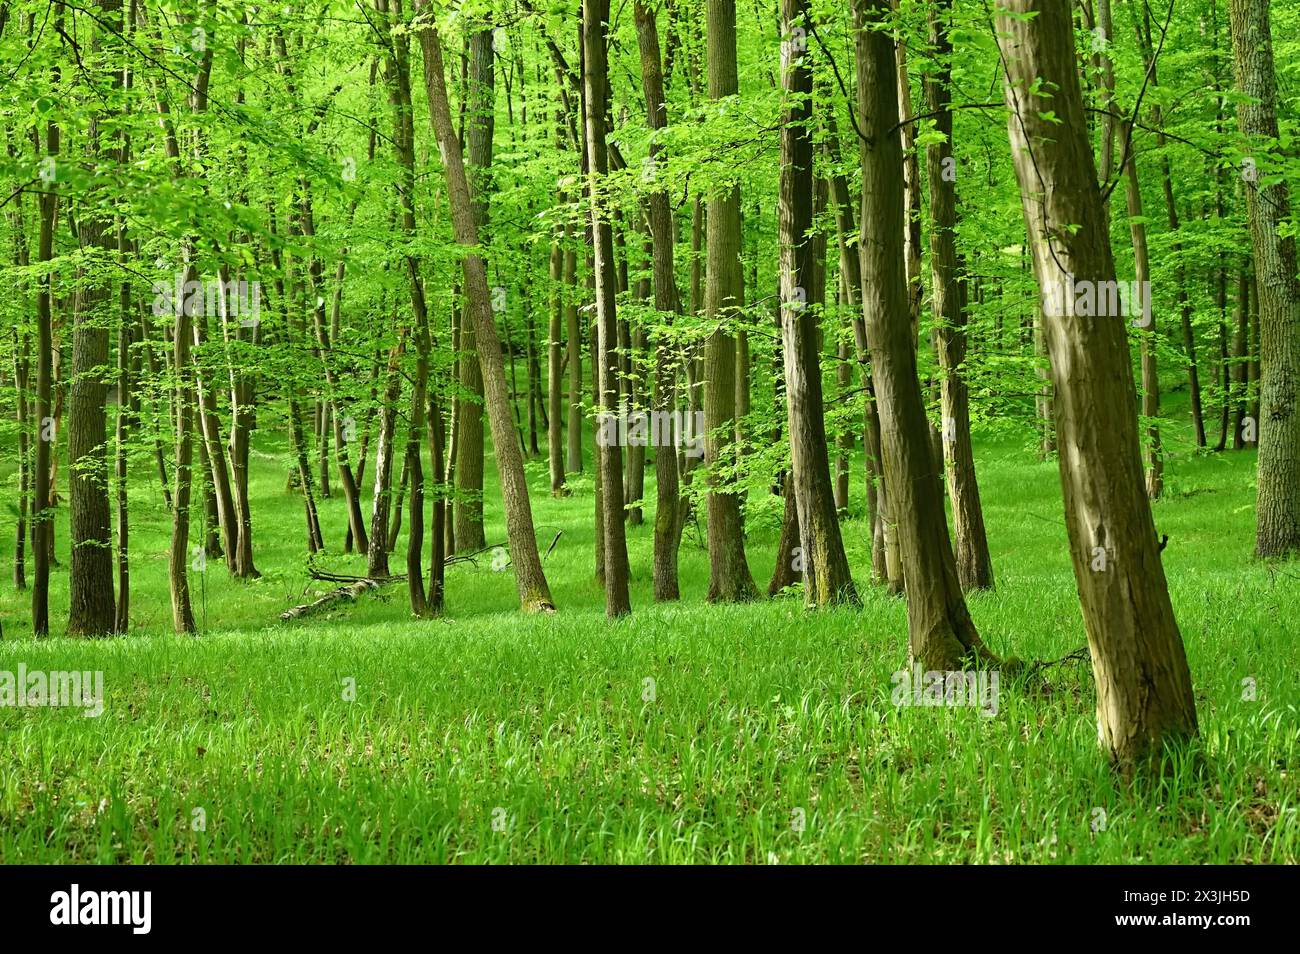 Beautiful green forest with trees in the background. Concept for nature and environment. Spring in the forest landscape. Stock Photo